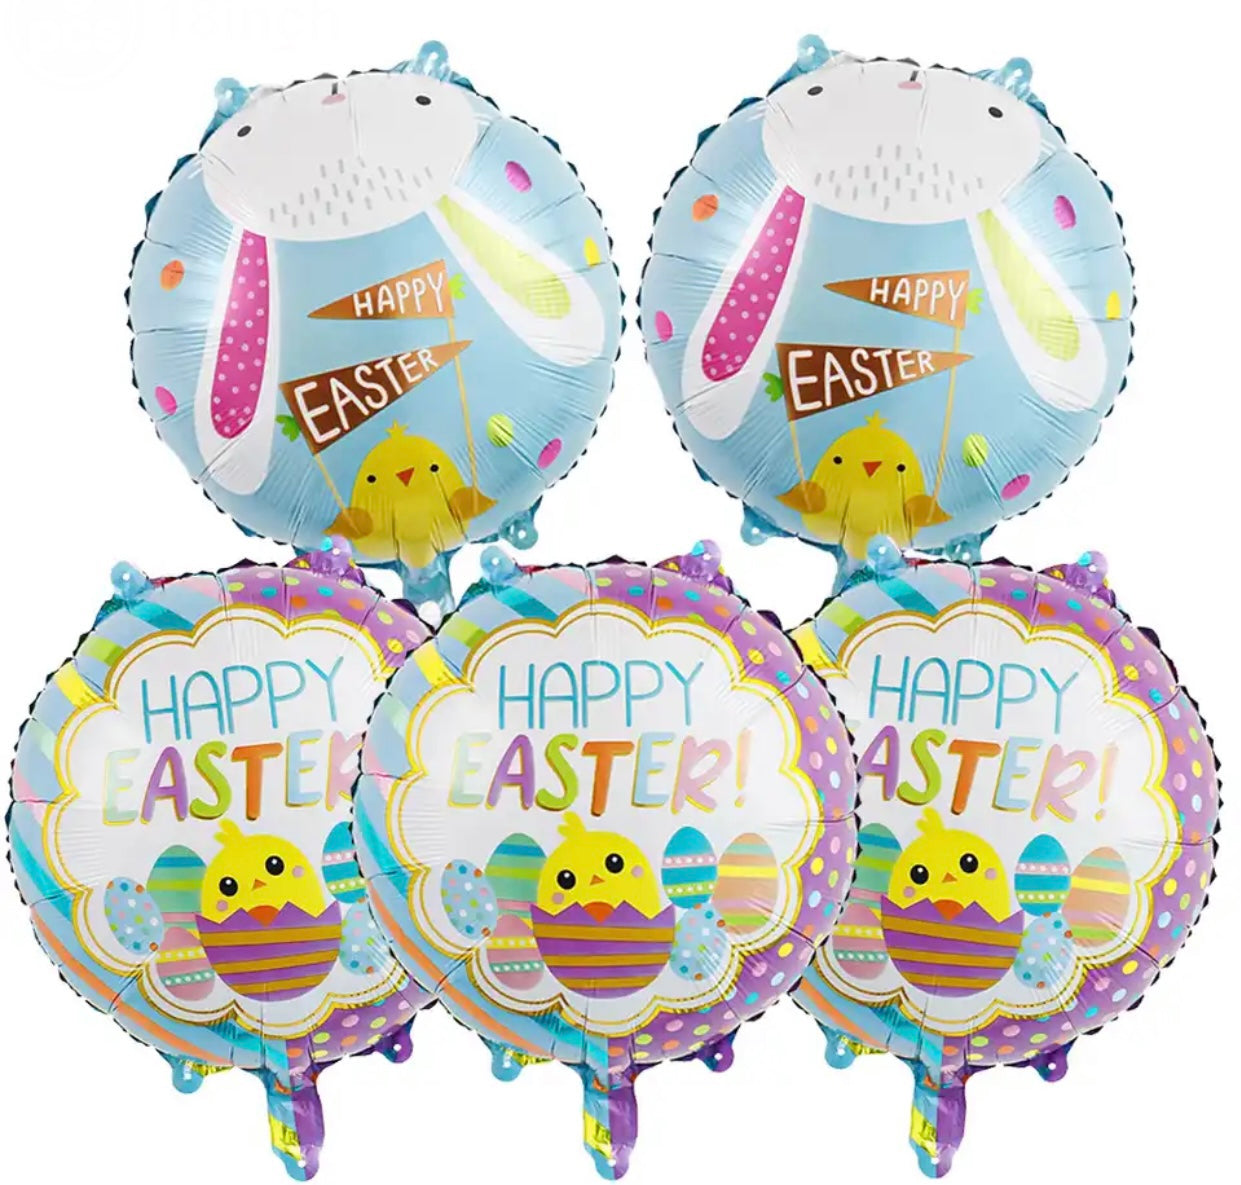 Happy Easter Foil Balloon, Bunny or Chick, Party Decoration, Balloon